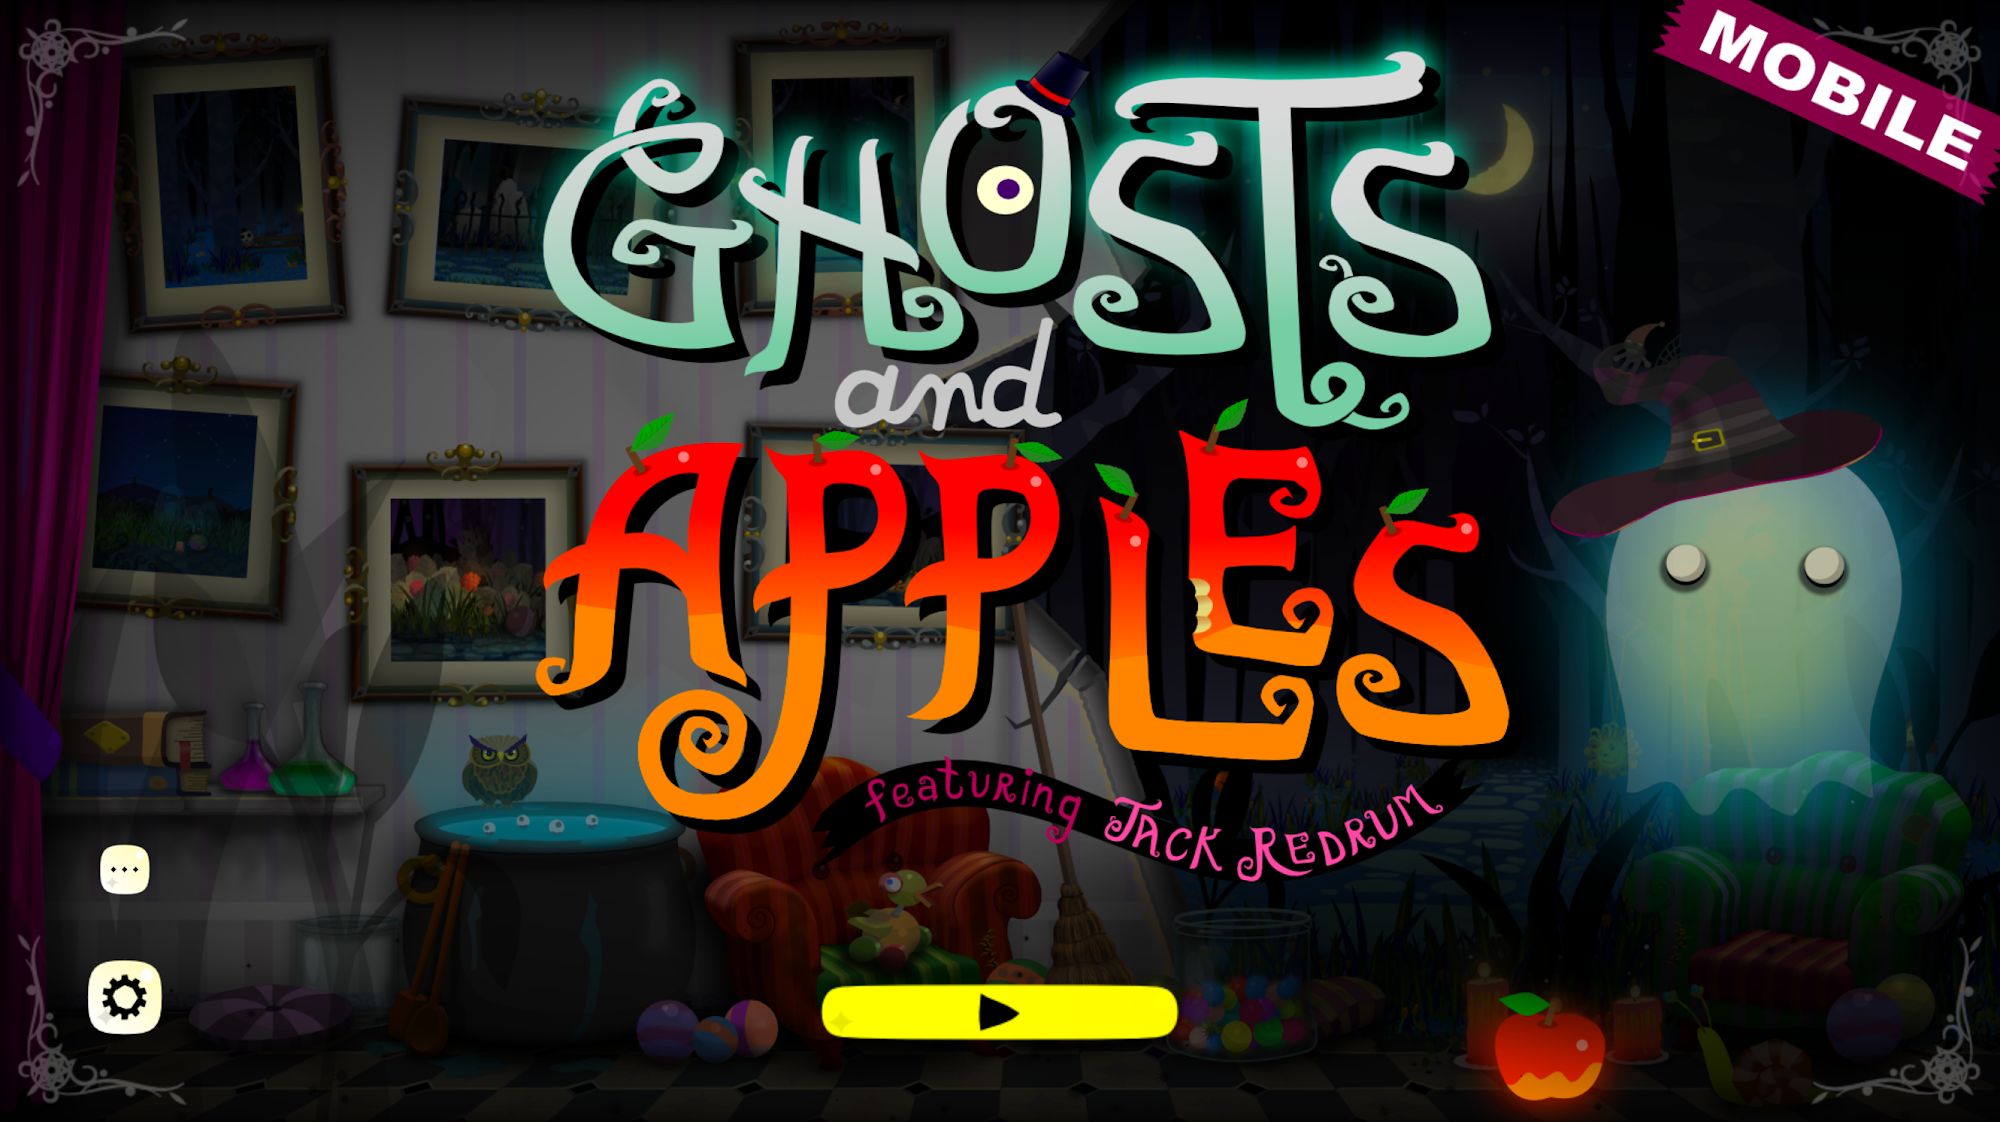 Download Ghosts and Apples Mobile für Android kostenlos.